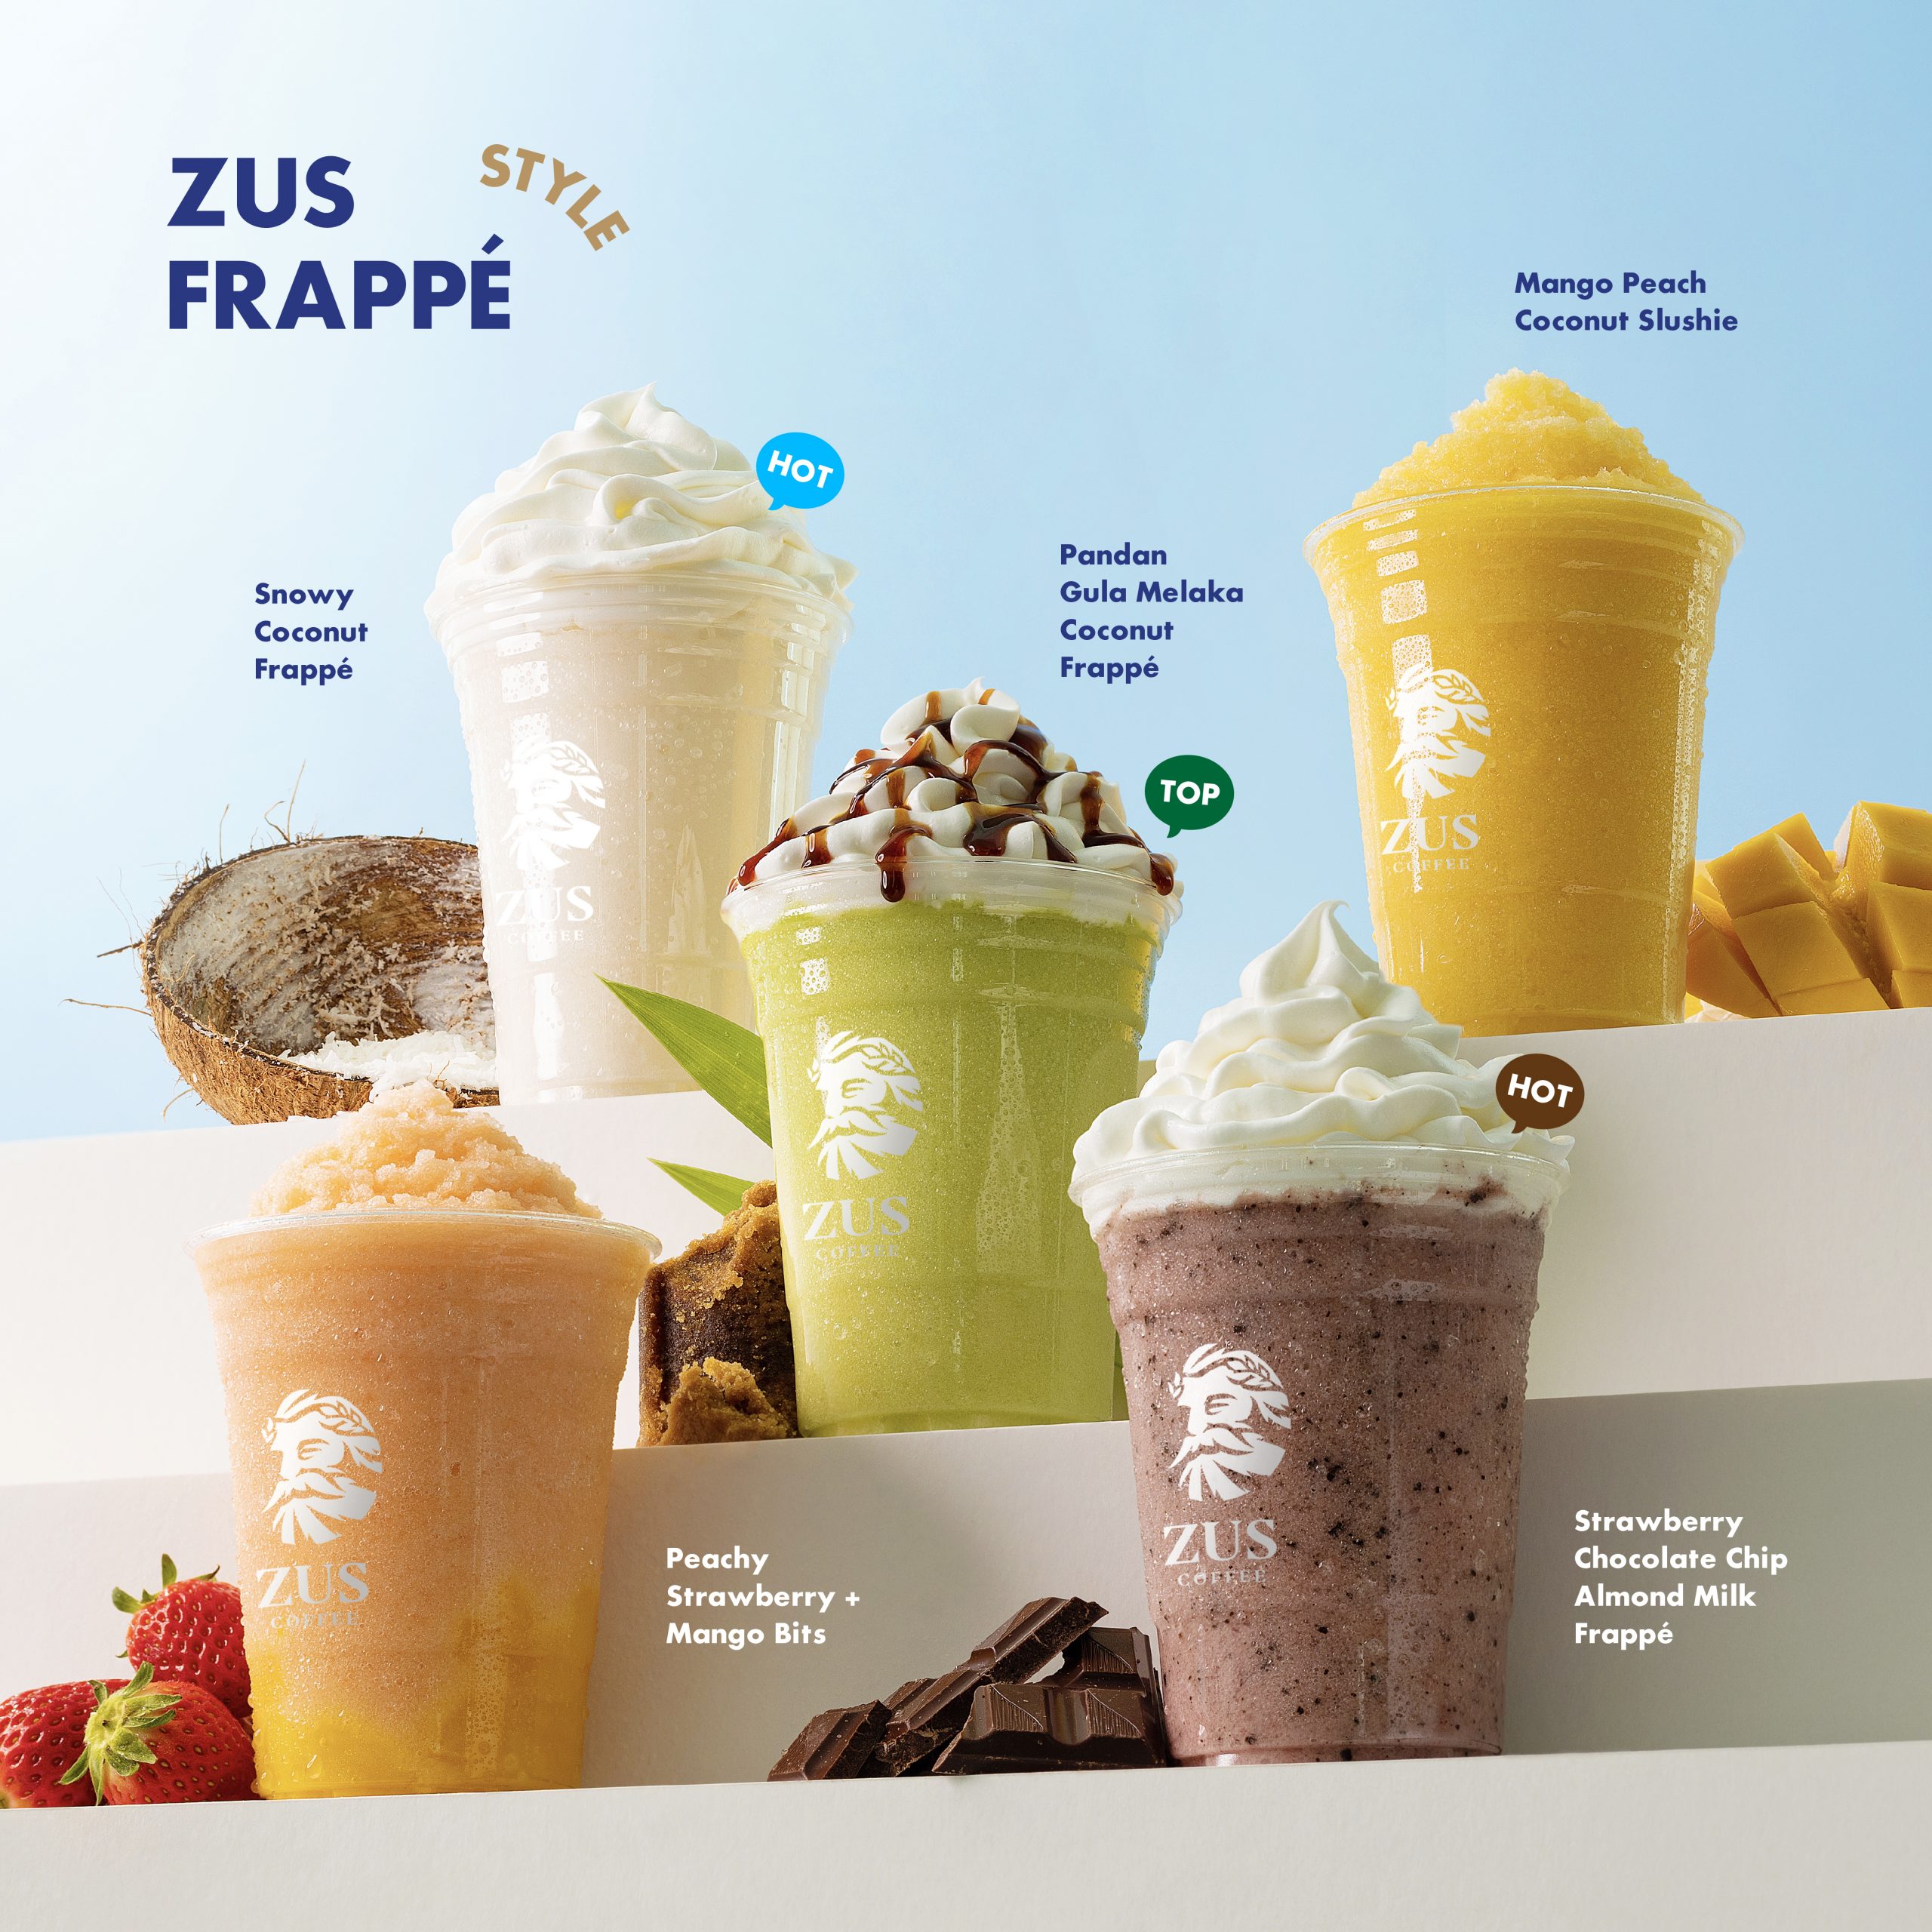 Launched first ZUS Frappe